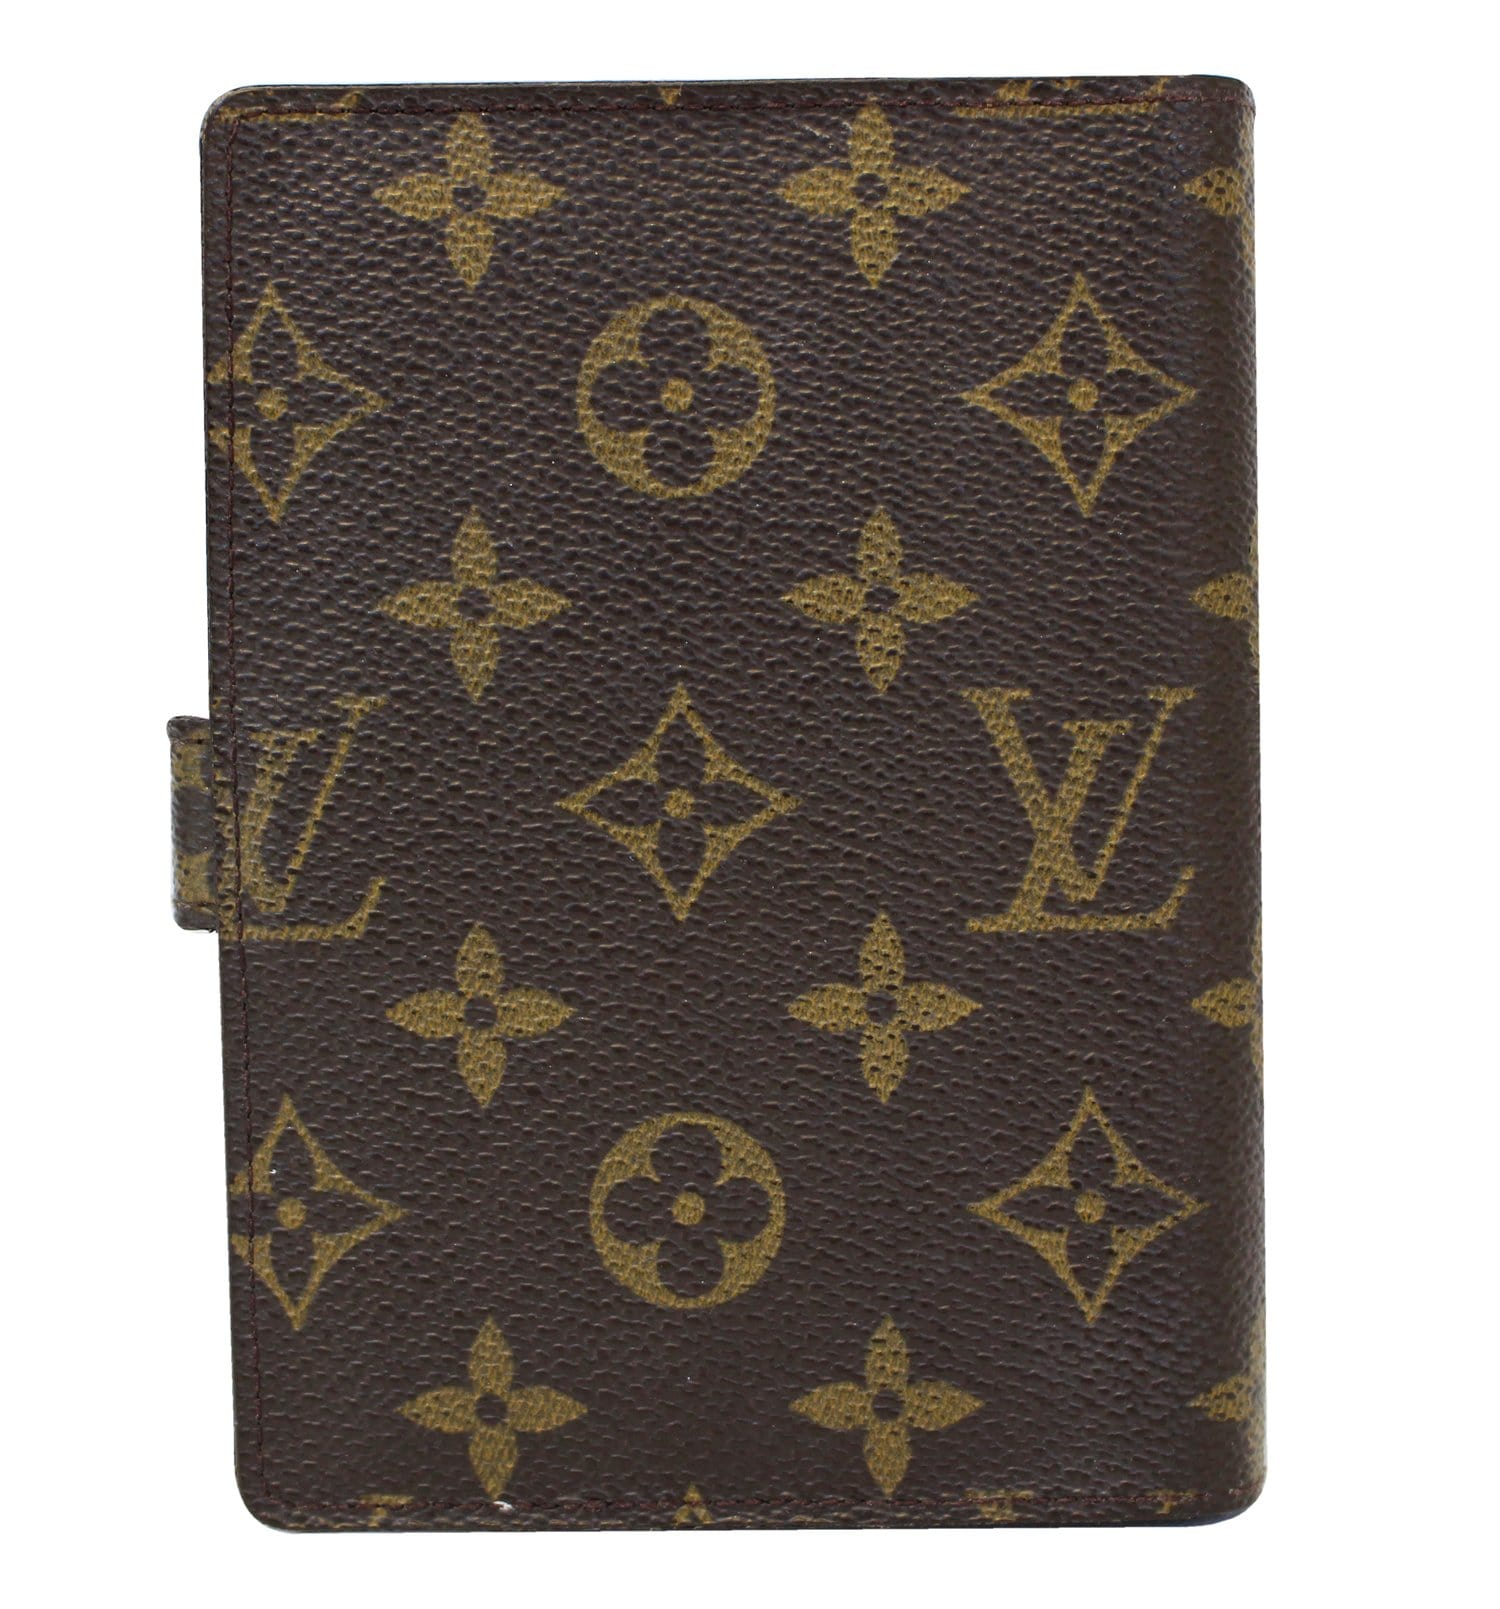 Authentic Louis Vuitton Monogram Agenda PM Day Planner Cover with pen –  KimmieBBags LLC